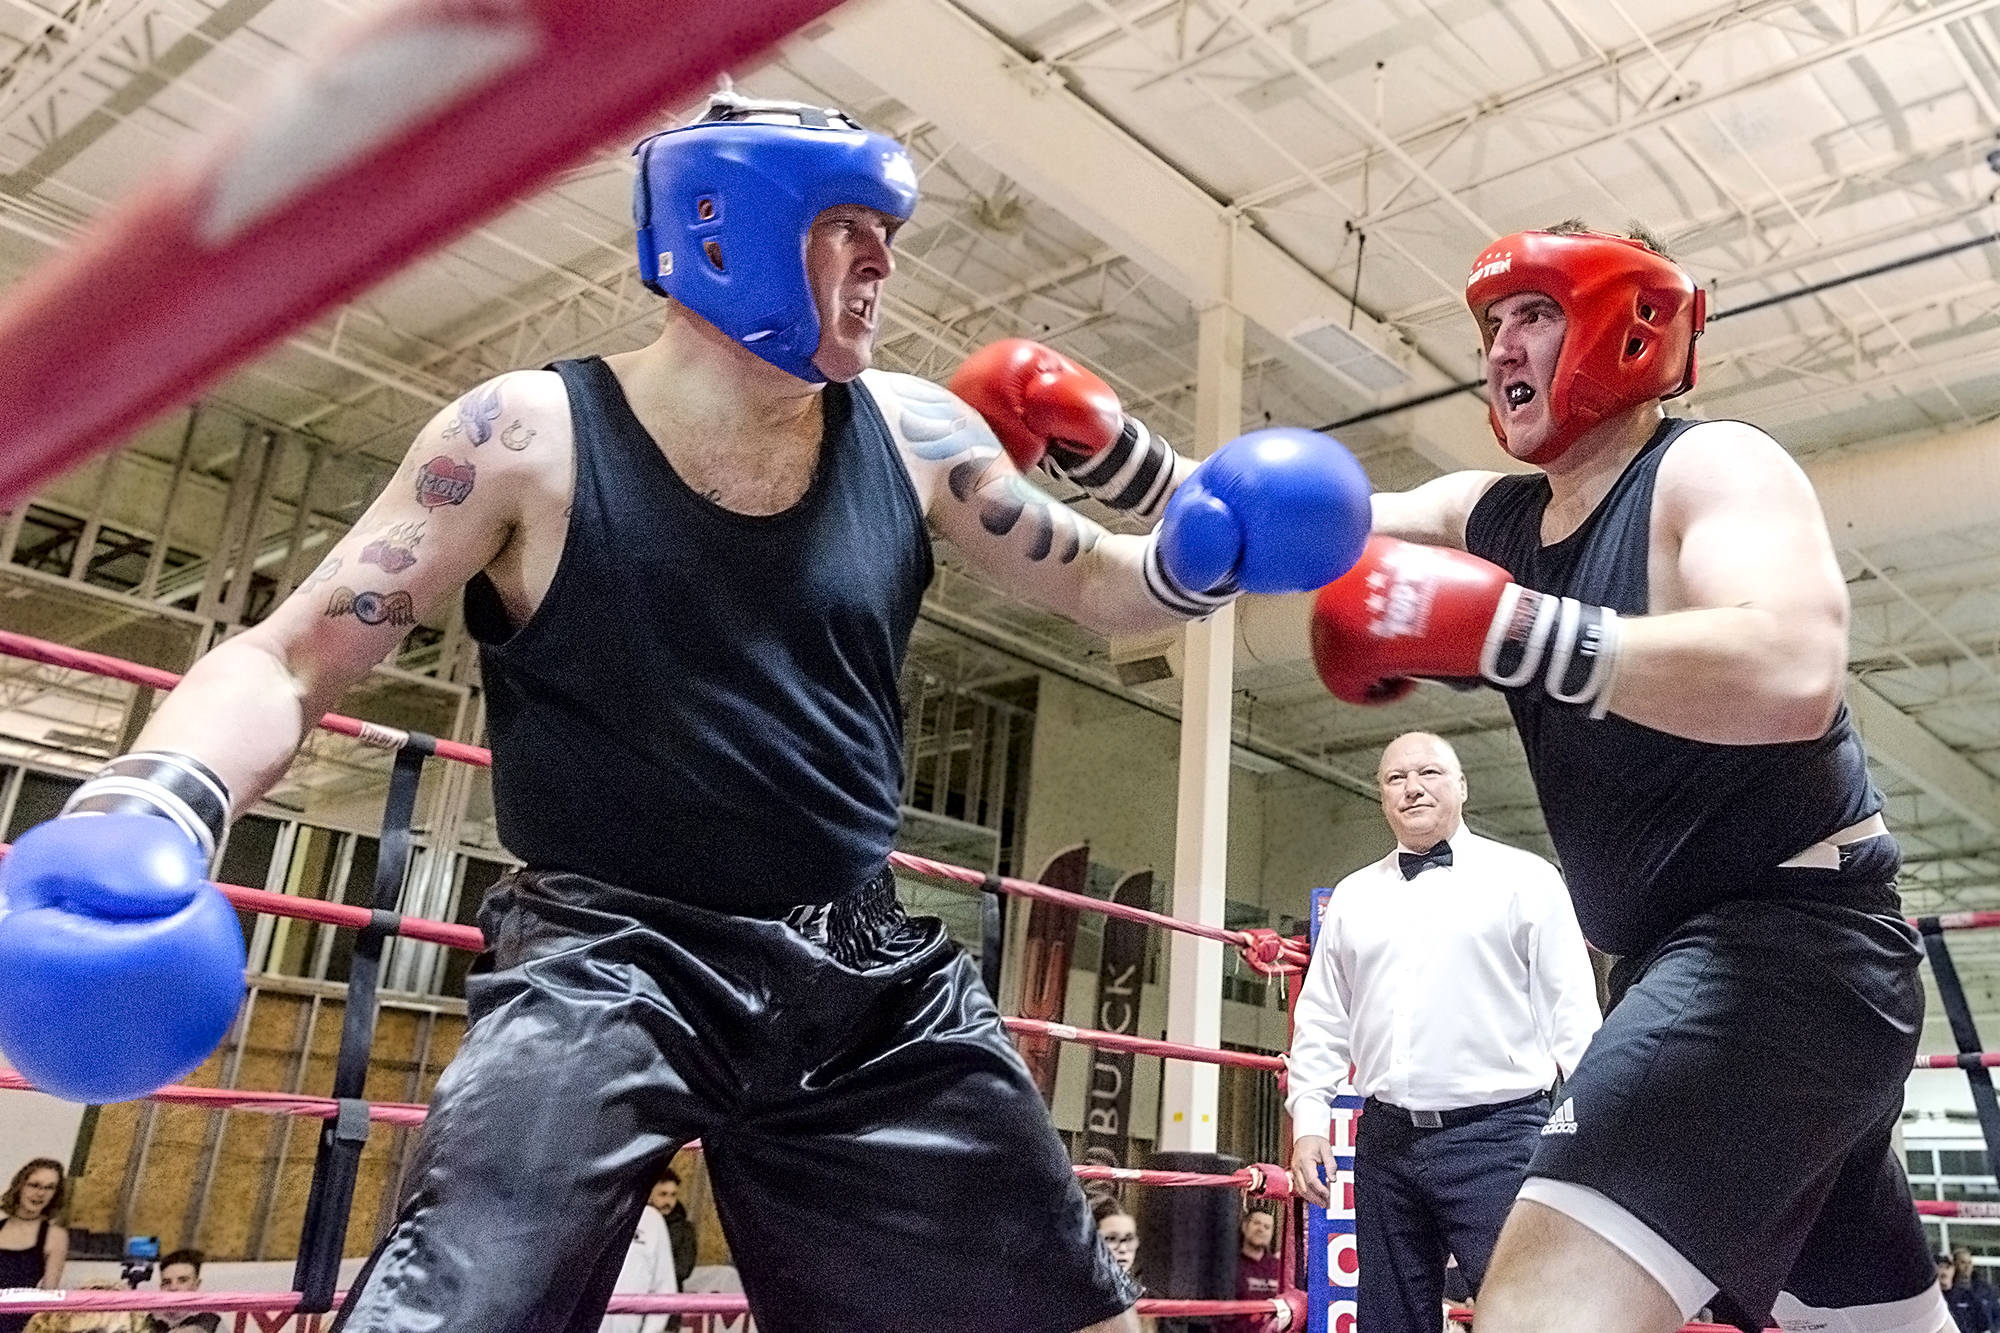 The Salmon Arm Observer’s Jim Elliot dukes it out with Wade Stewart during the inaugural Hit2Fit charity boxing event at Westgate Public Market in 2017. (File photo)